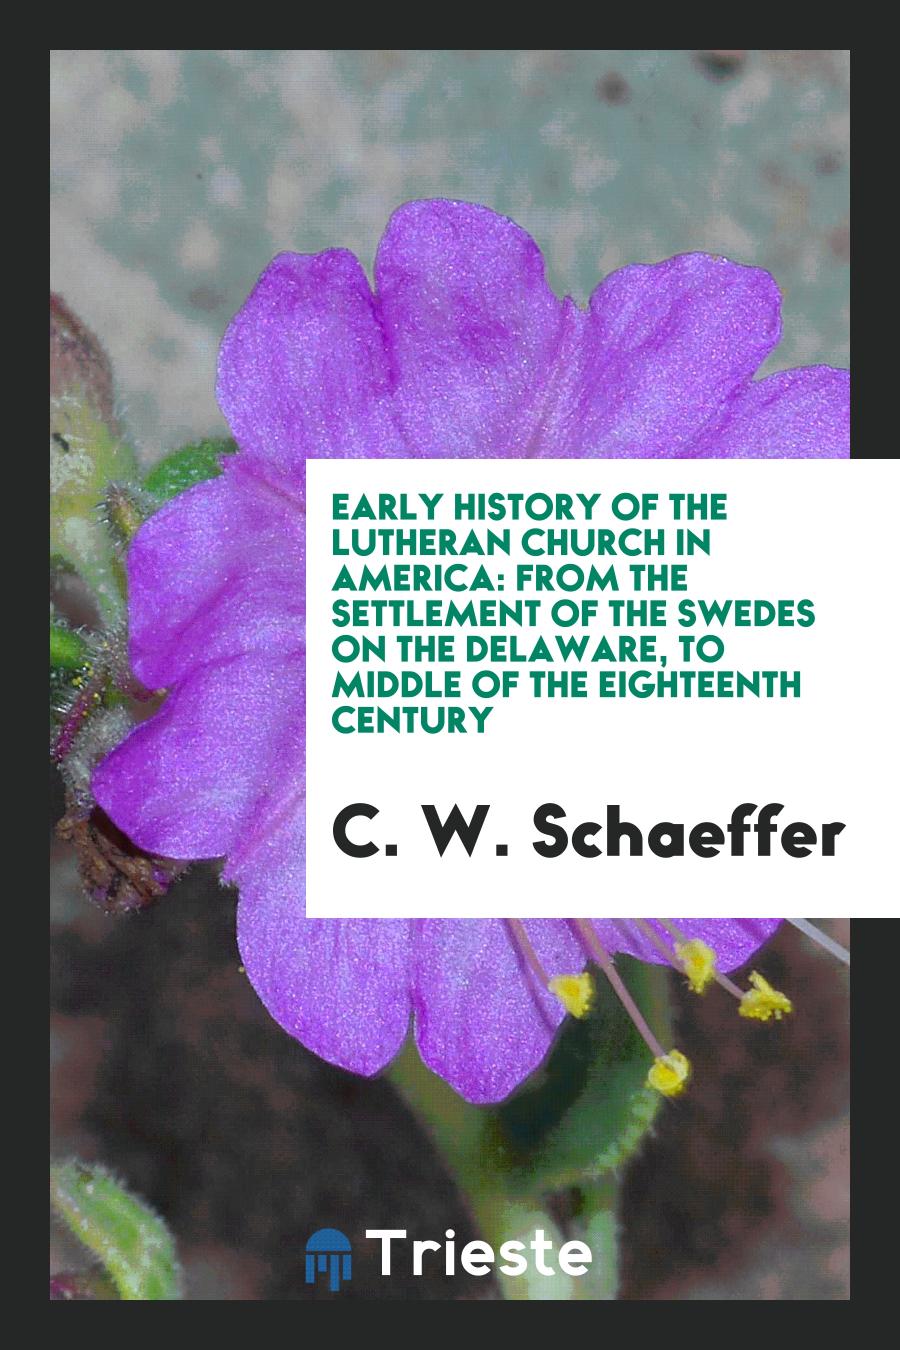 Early History of the Lutheran Church in America: From the Settlement of the Swedes on the Delaware, to Middle of the Eighteenth Century